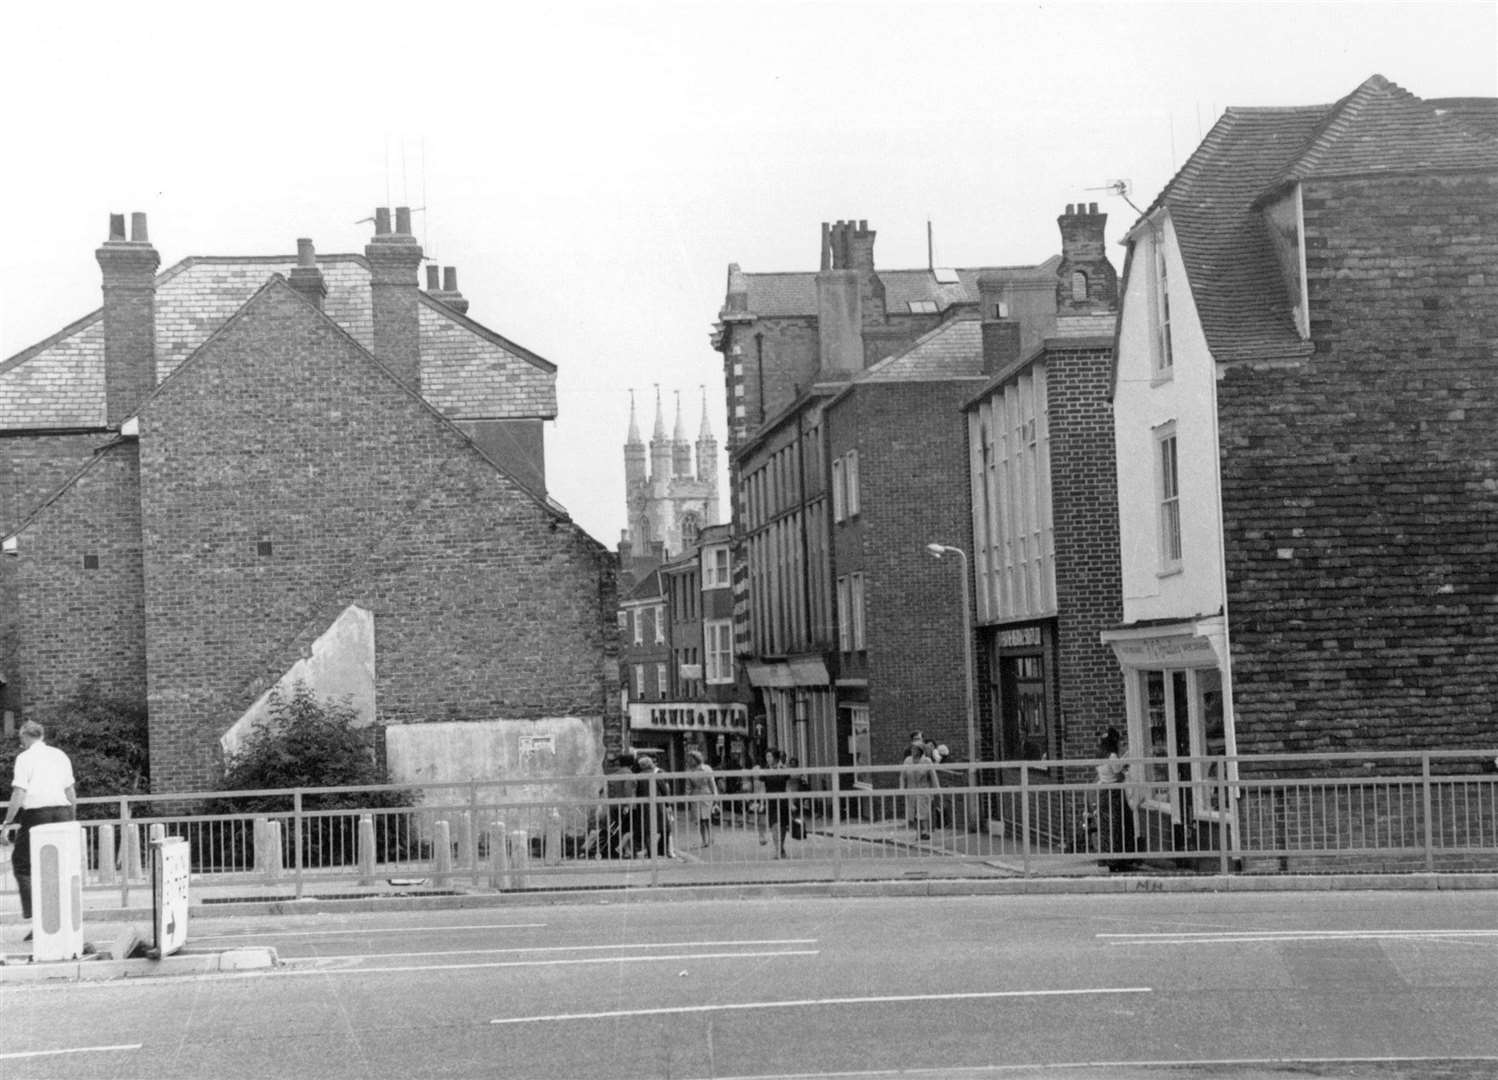 New Rents, 1975. Once crossing Forge Lane from New Street, this was the view back in the early 1970s in the days before Safeway purchased the Gravel Walk car park for their new supermarket which latterly became Lidl. Again, Lewis and Hyland can clearly be seen below the church tower of St Mary the Virgin which shops including F.G Bradley; Bakers sundriesman can be seen on the right. Picture: Steve Salter